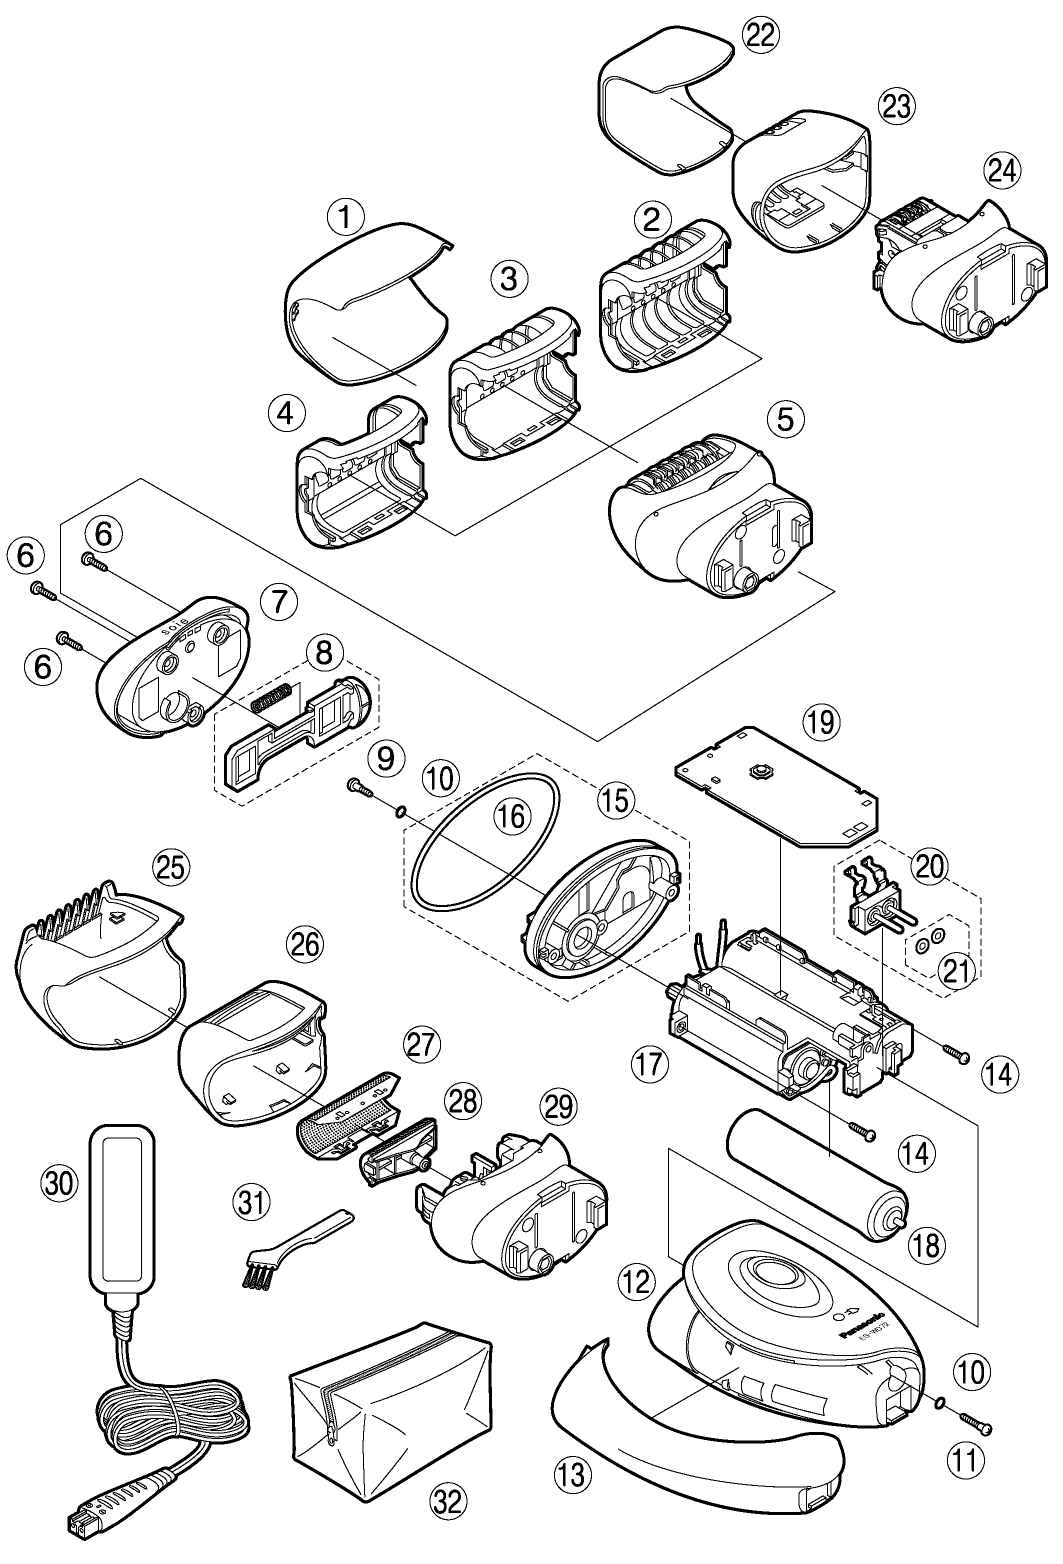 ES-WD72: Exploded View